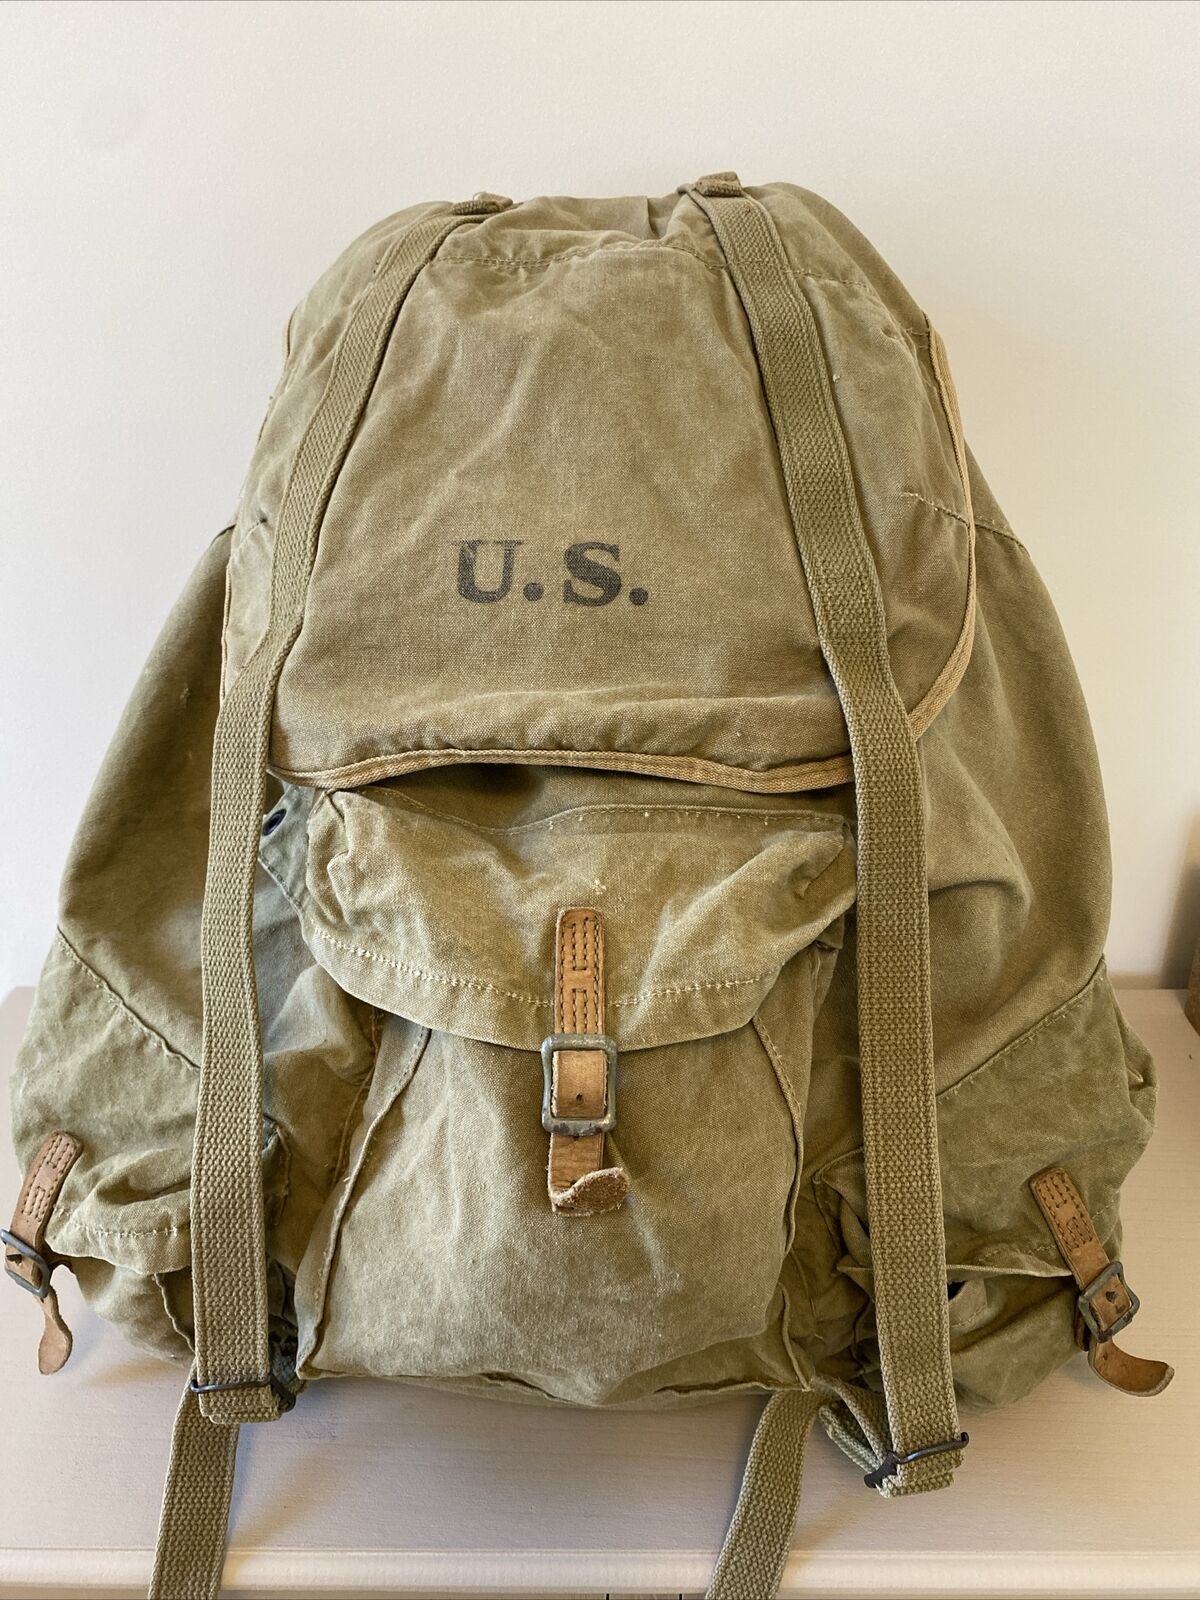 WW2 WWII US Army Military Mountain Rucksack Backpack w/ Frame Hinson MFG 1942